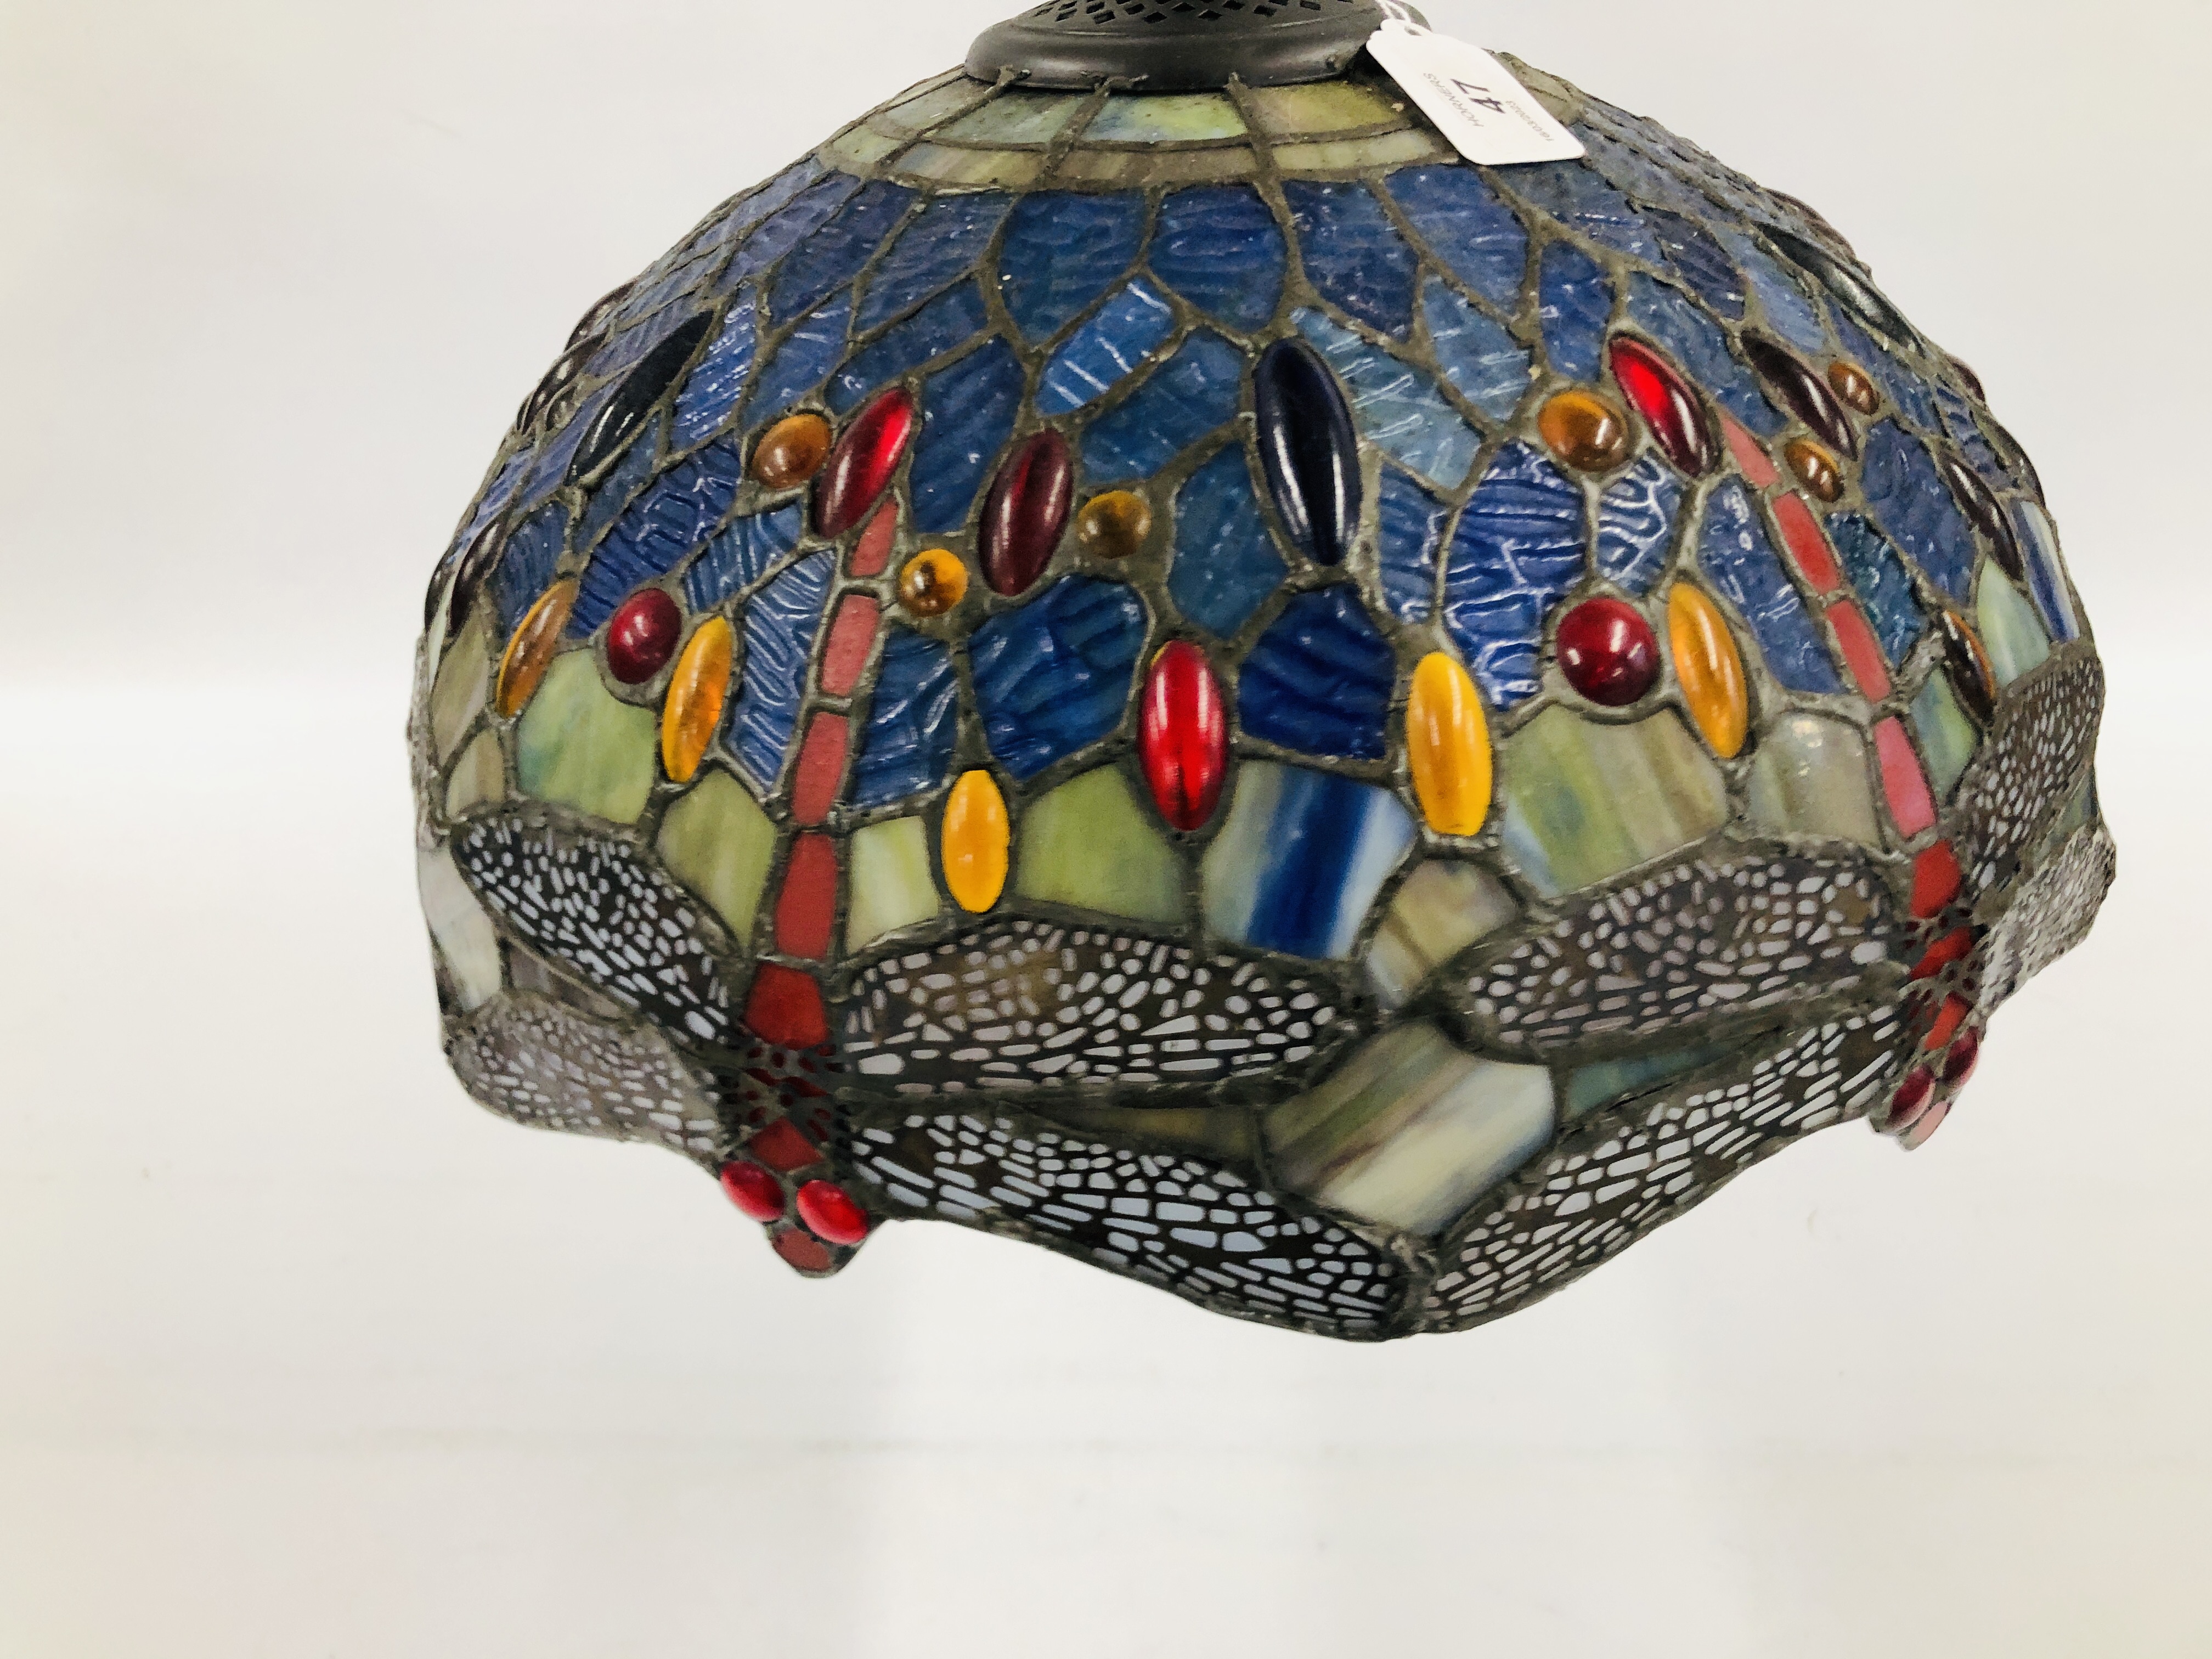 A TIFFANY STYLE STAINED GLASS DRAGONFLY CEILING LIGHT DIA. 40CM. - Image 2 of 7